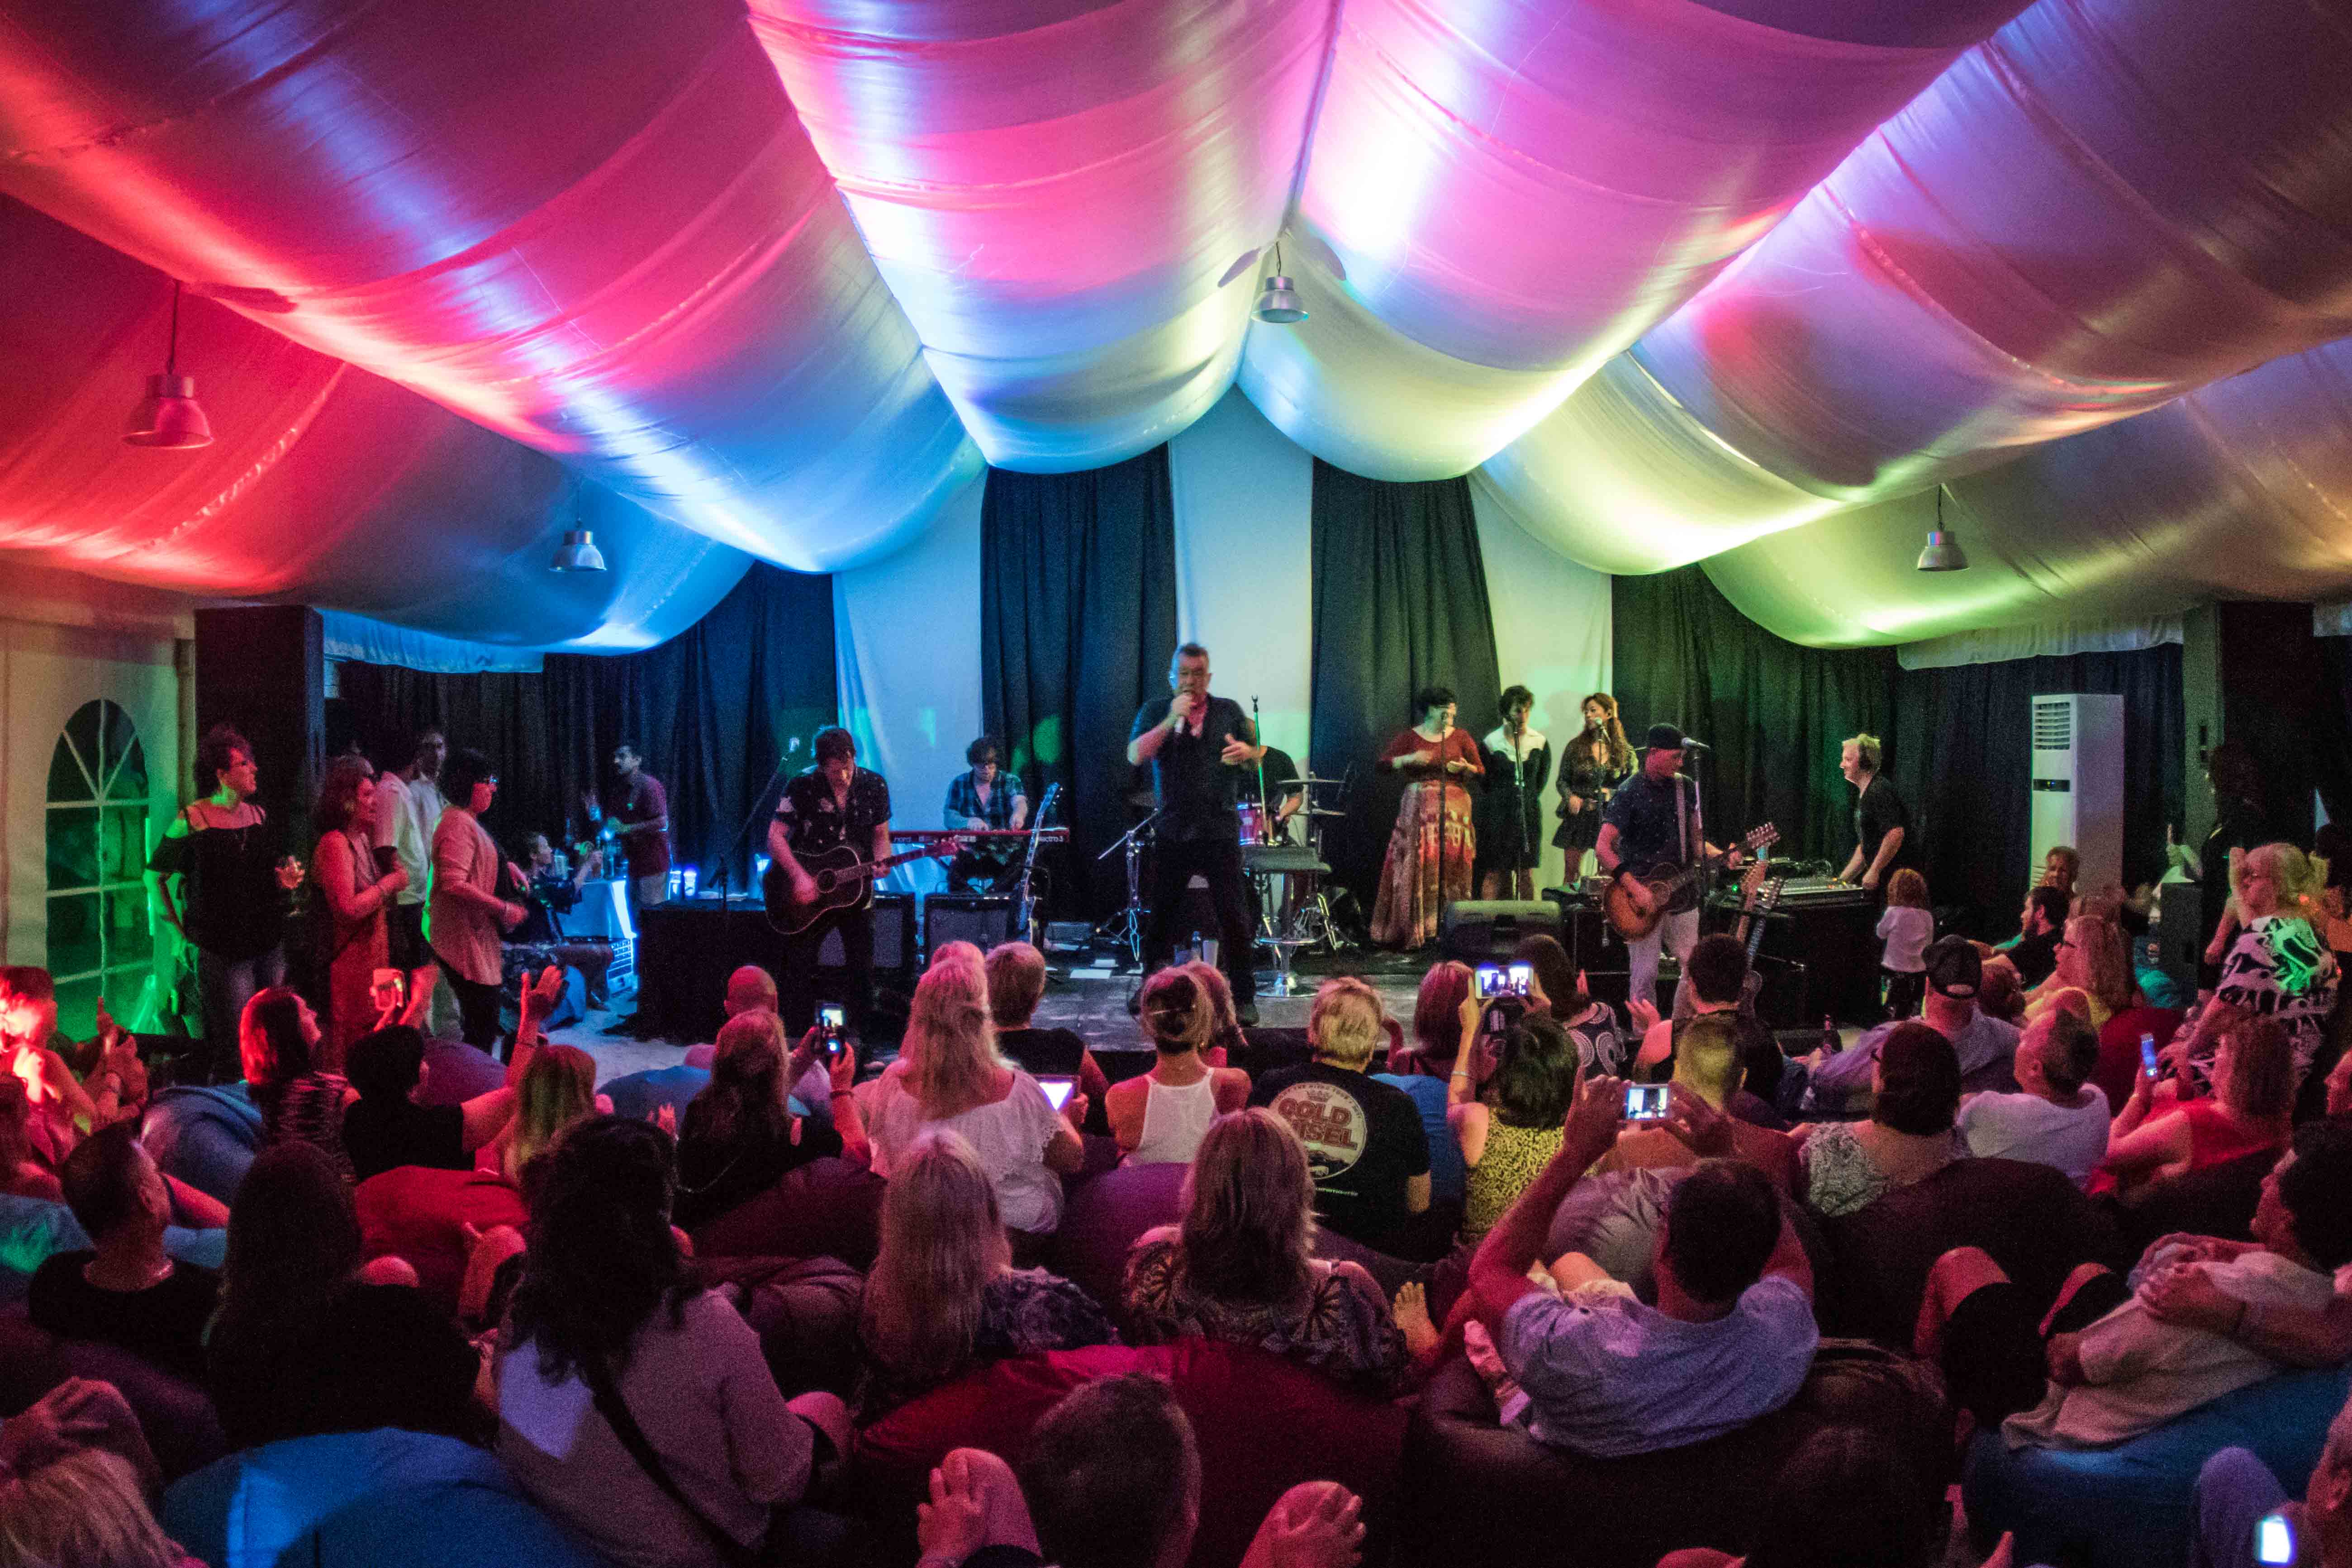 The atmosphere was intimate and electric inside the marquee. - Photo Andy Potts.